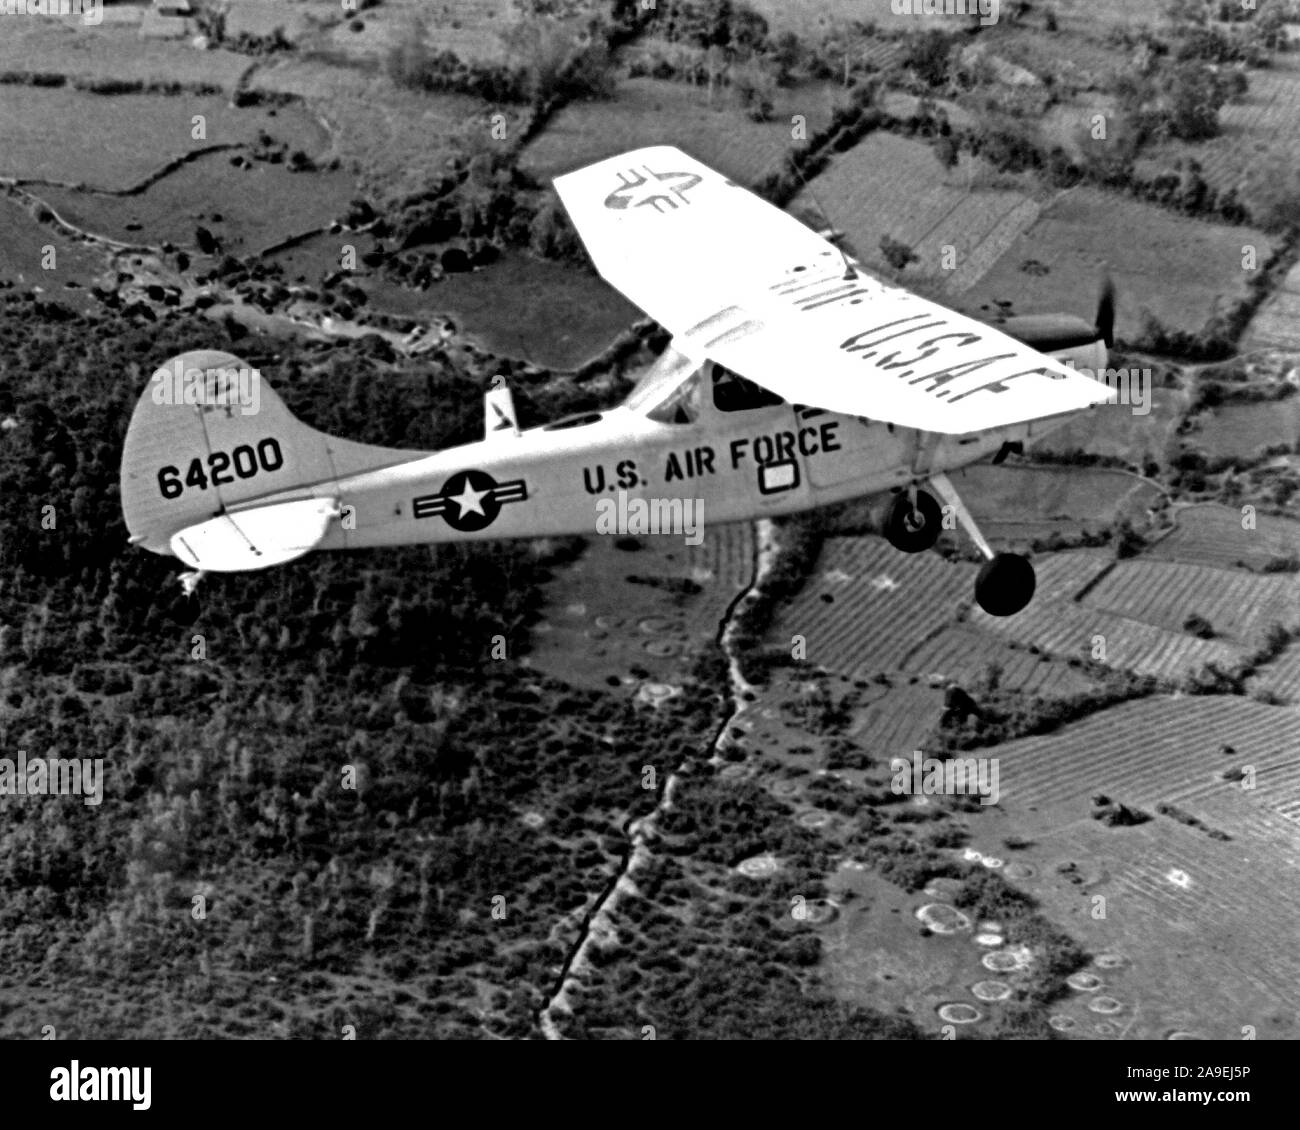 1967 - An air-to-air right side view of a U.S. Air Force 0-1E Bird Dog aircraft.  The aircraft is used as a forward air control aircraft throughout South Vietnam. Stock Photo